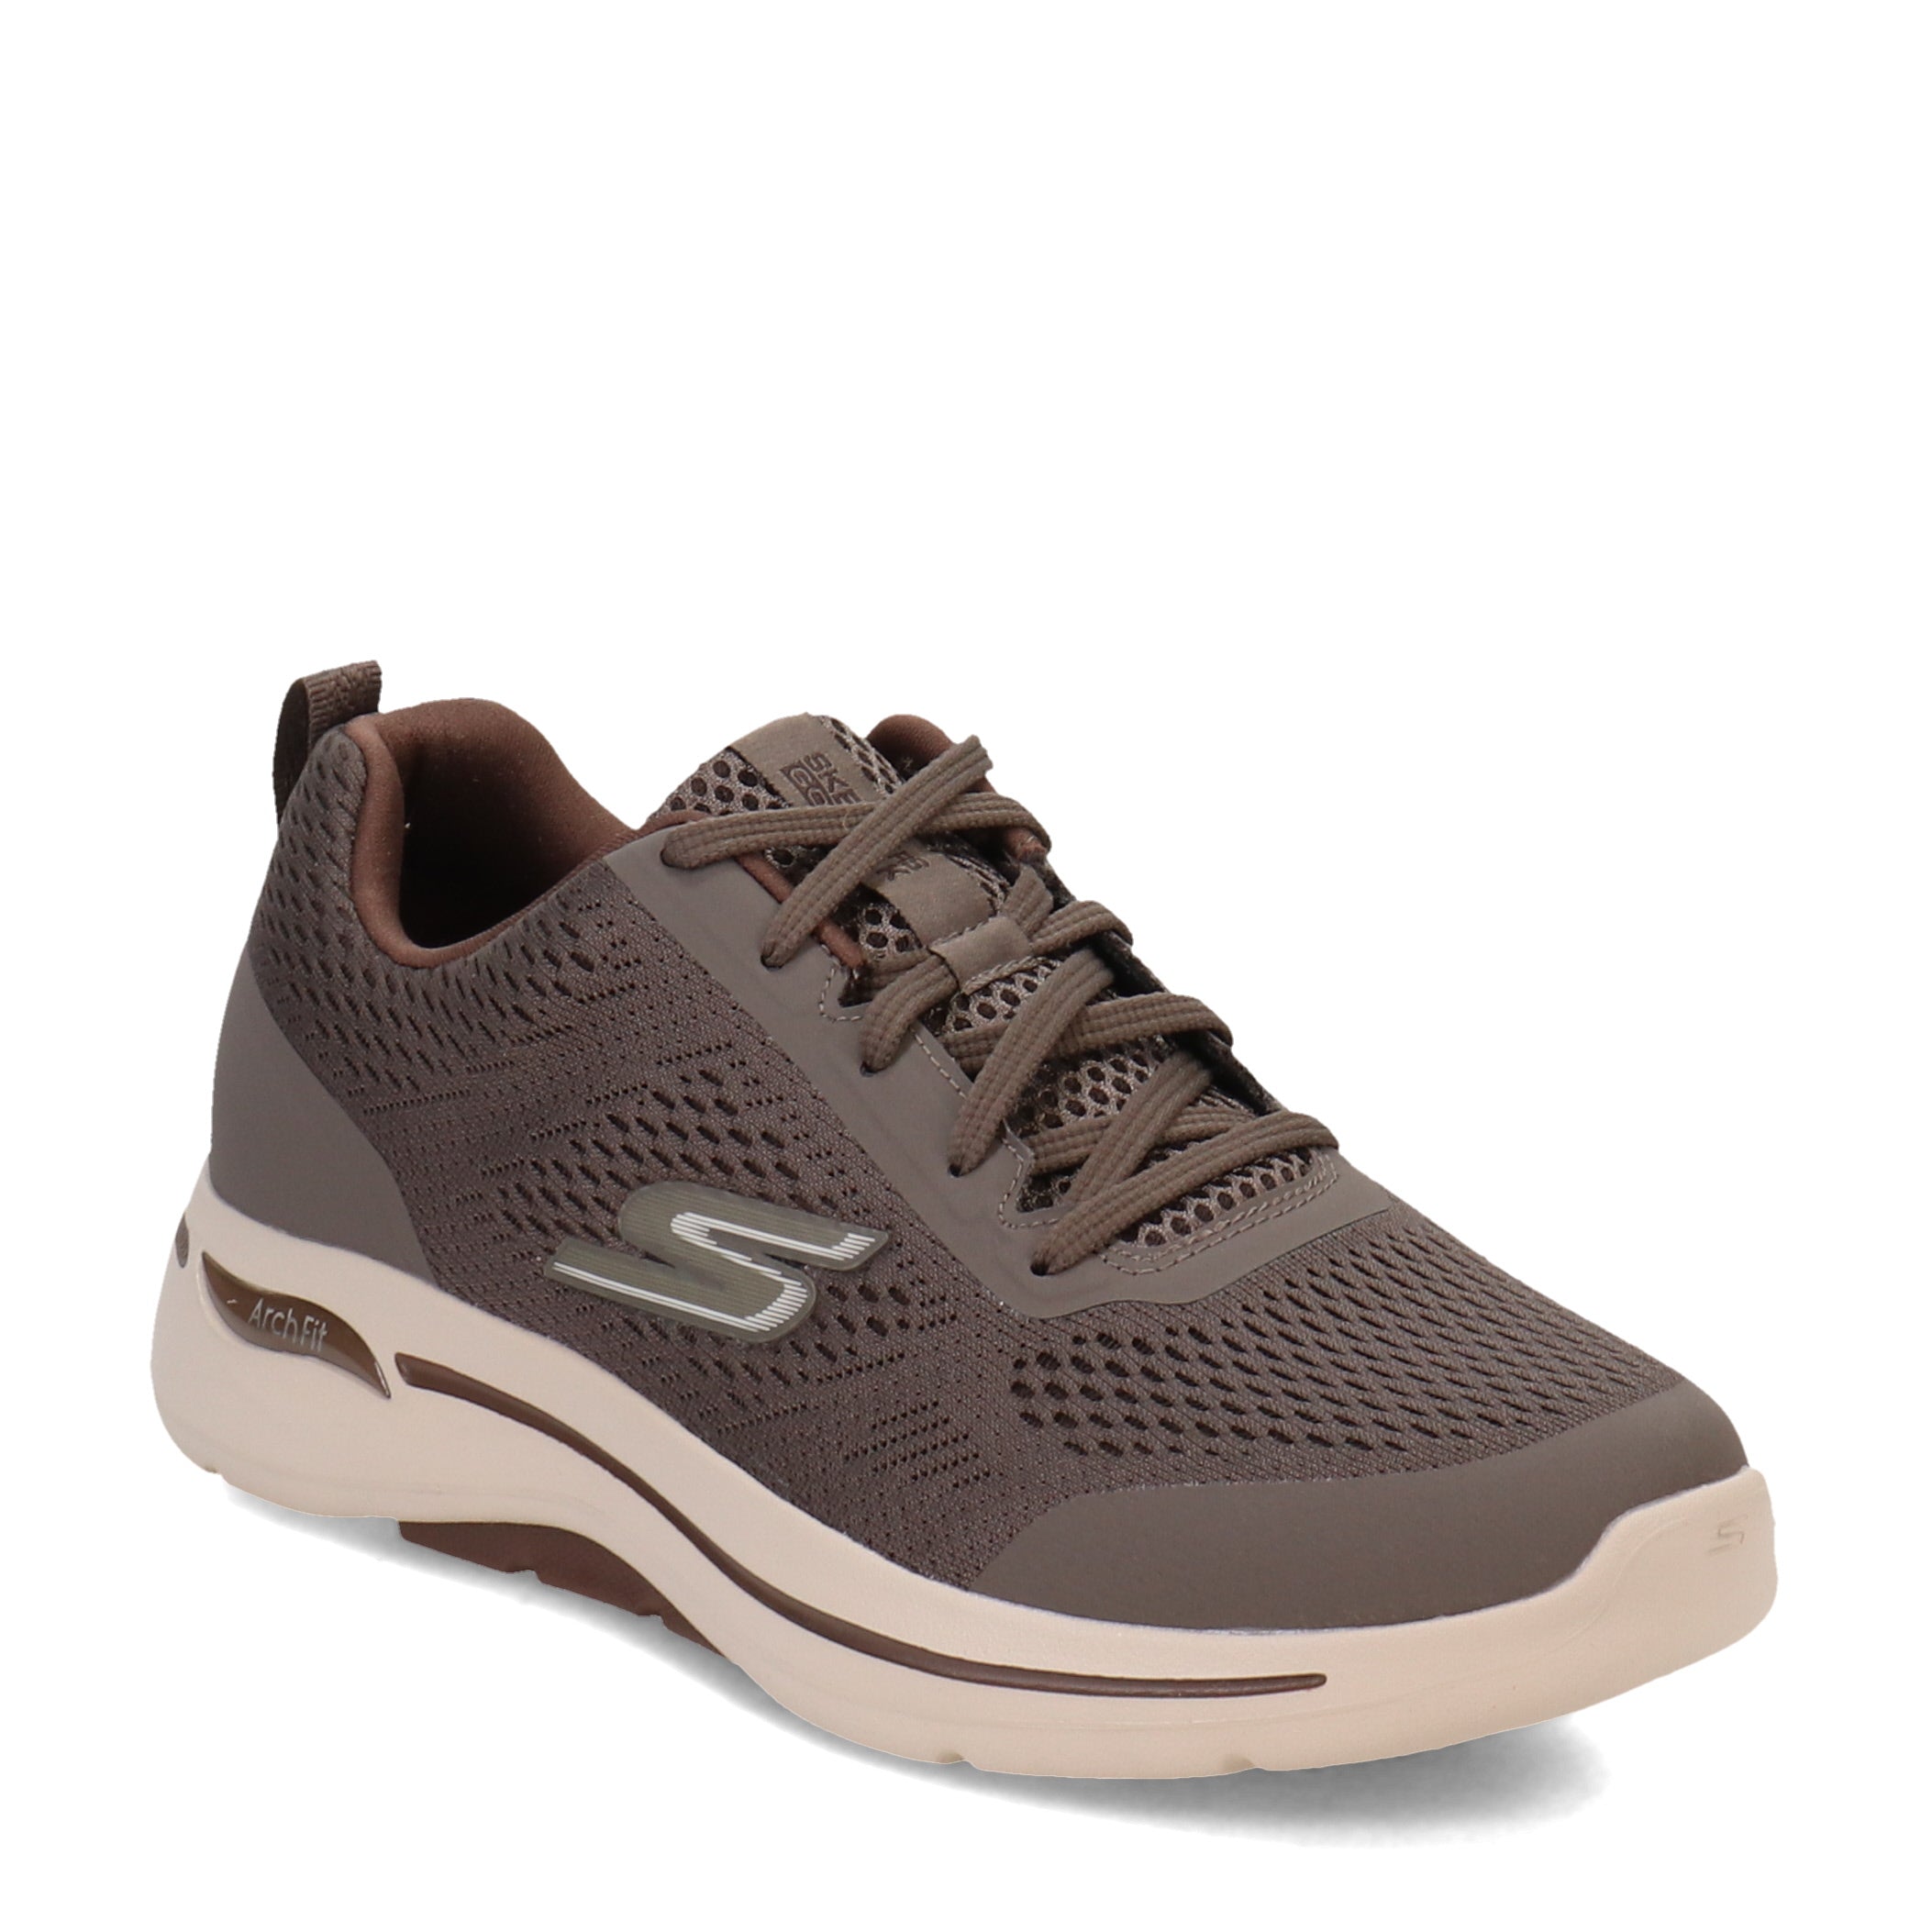 Shoppers Love These Skechers GoWalk Shoes at Walmart